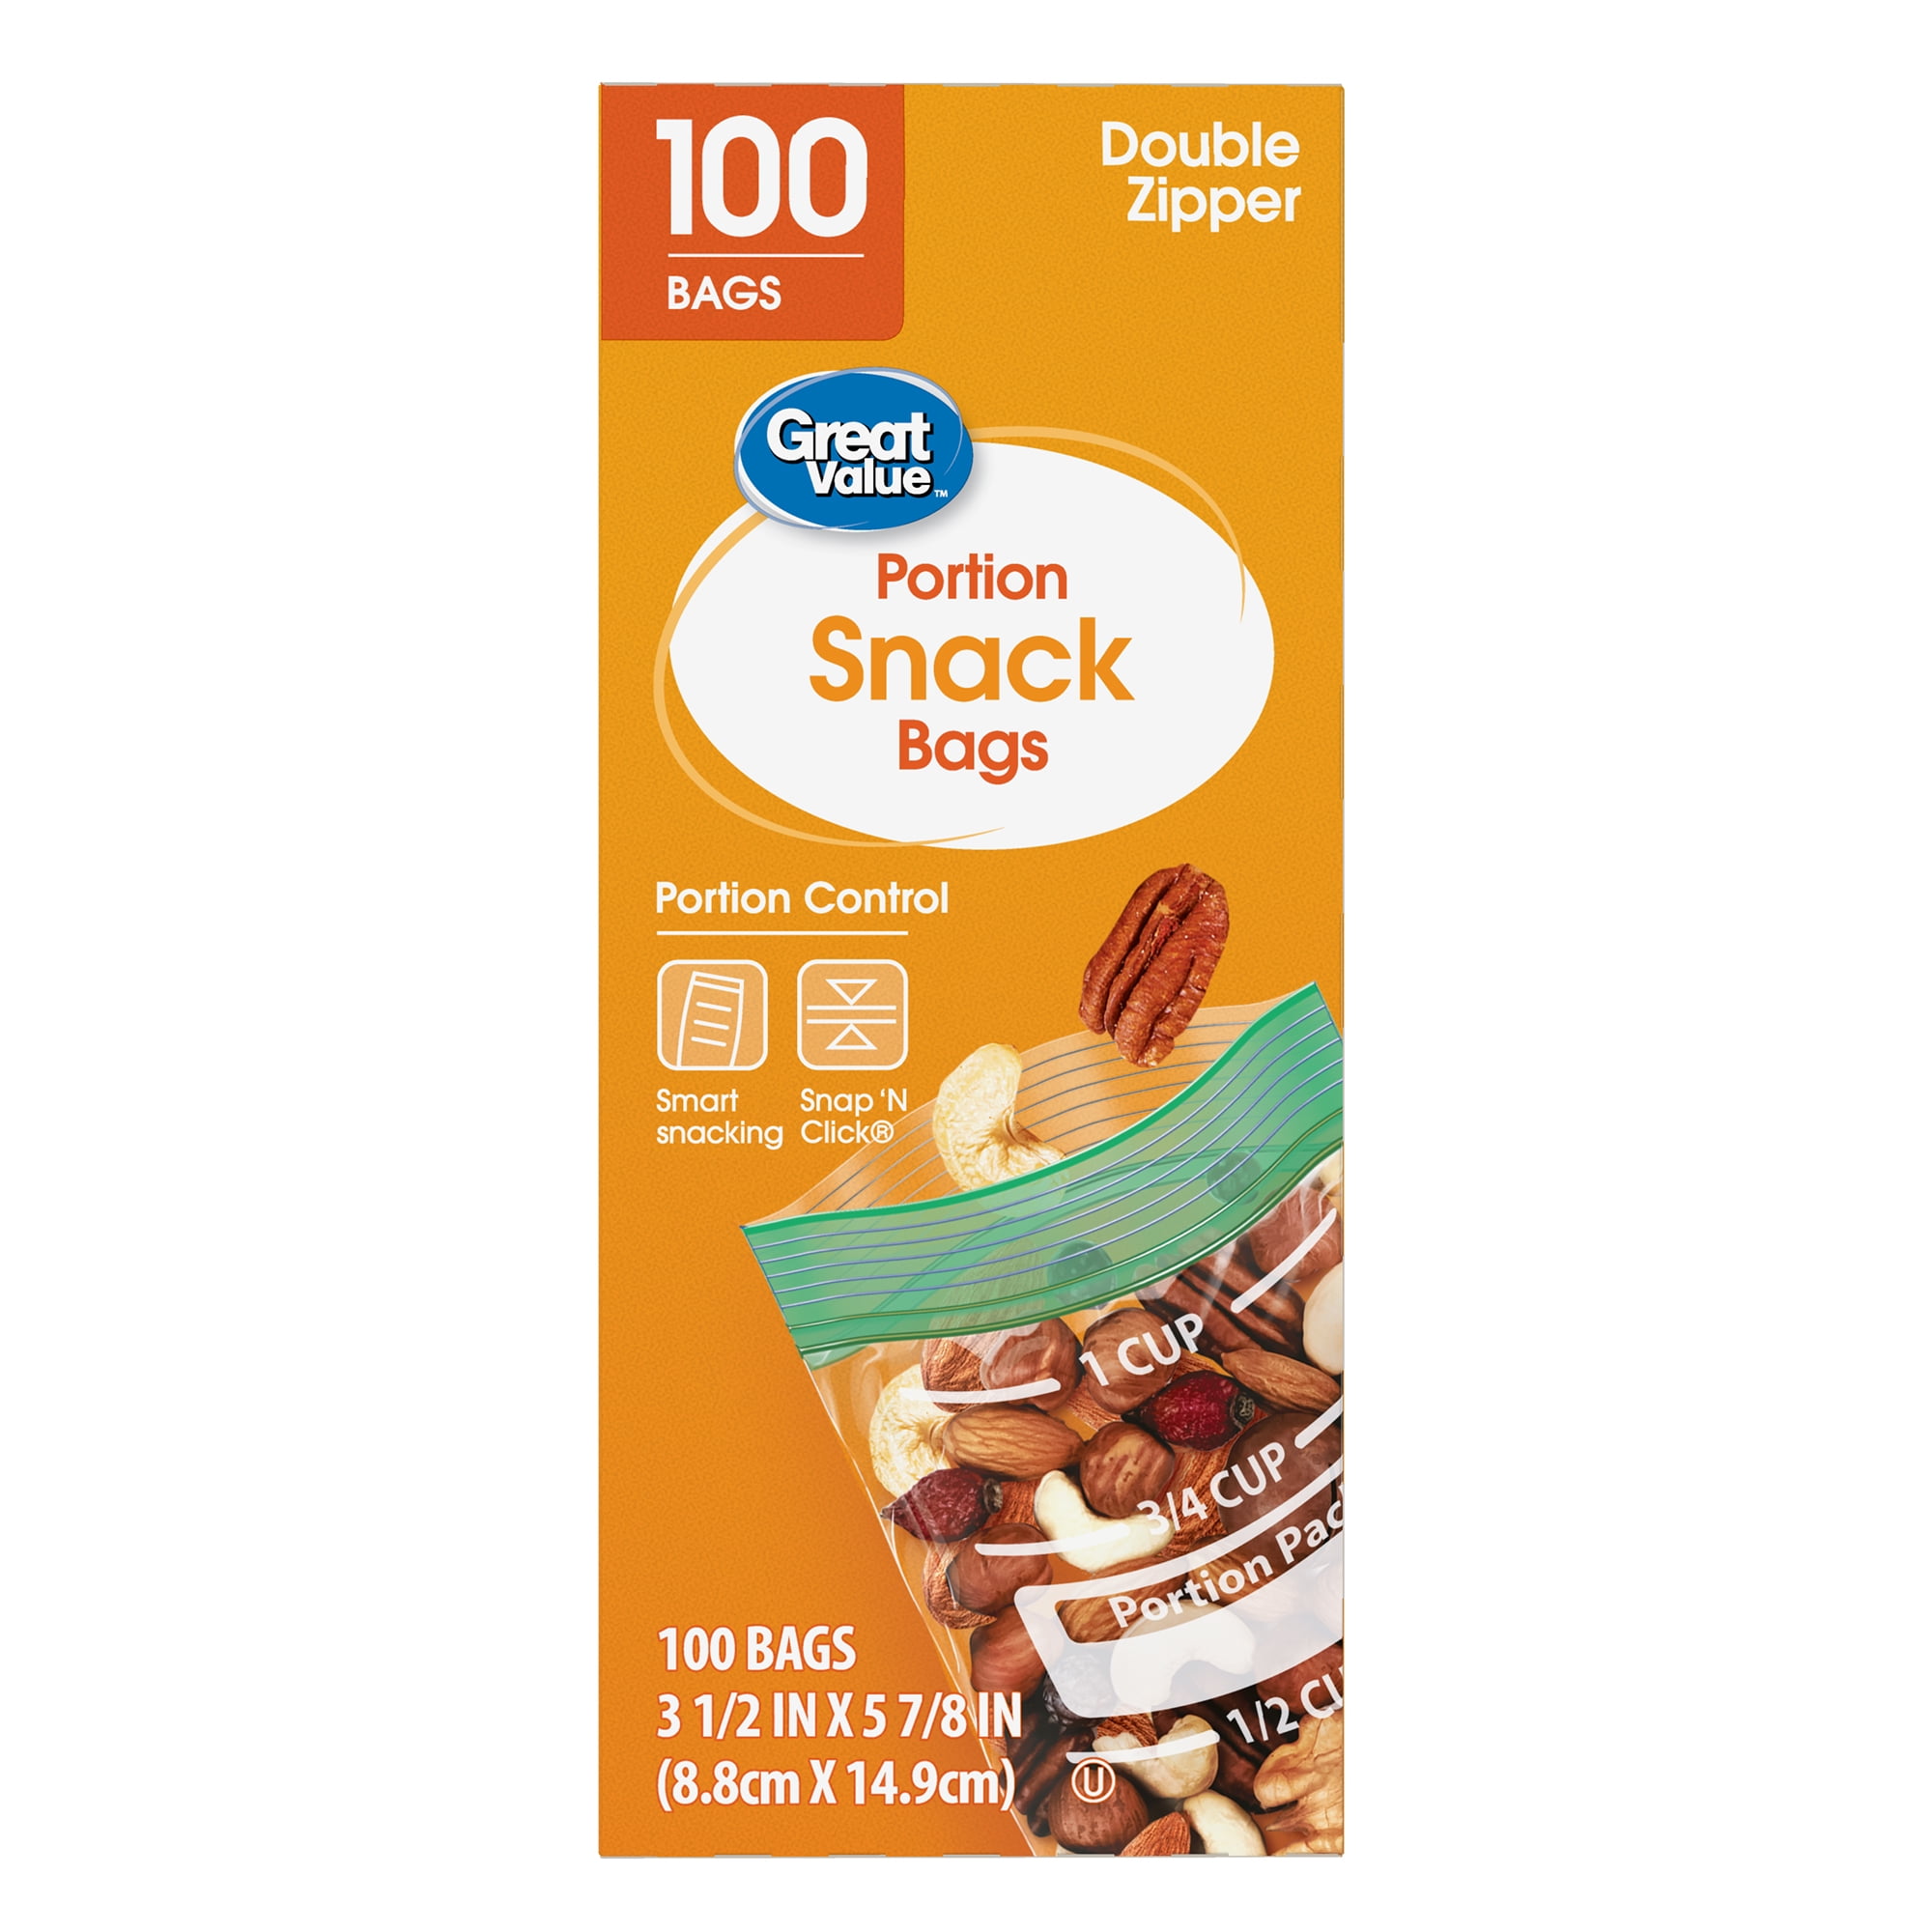 Double Zipper Snack Storage Bags, 50 snack size bags at Whole